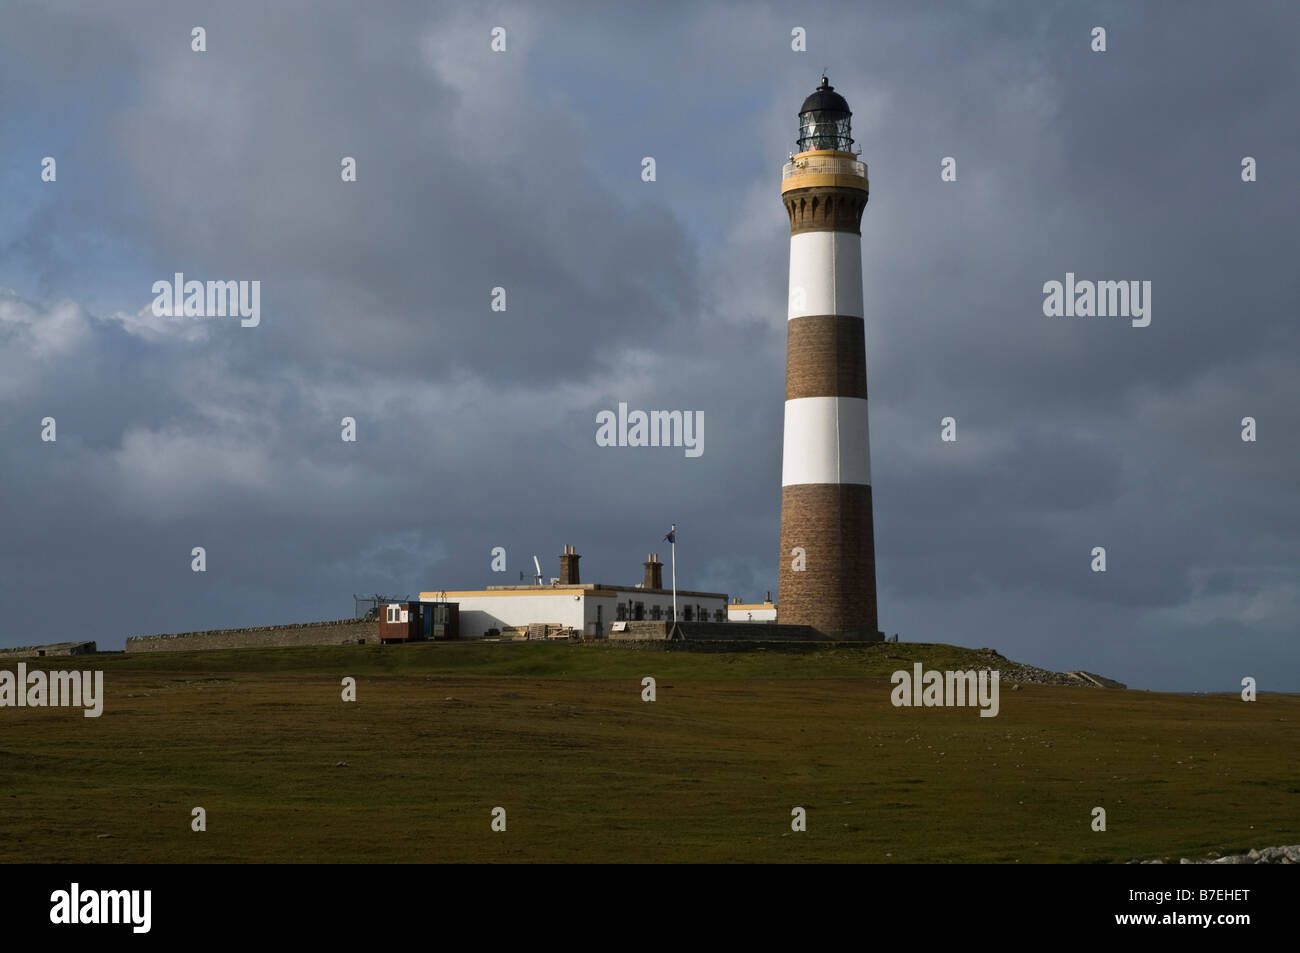 dh North Ronaldsay lighthouse NORTH RONALDSAY ORKNEY Lighthouse beacon Dennis ness Easting storm clouds nlhb tower light scotland island Stock Photo